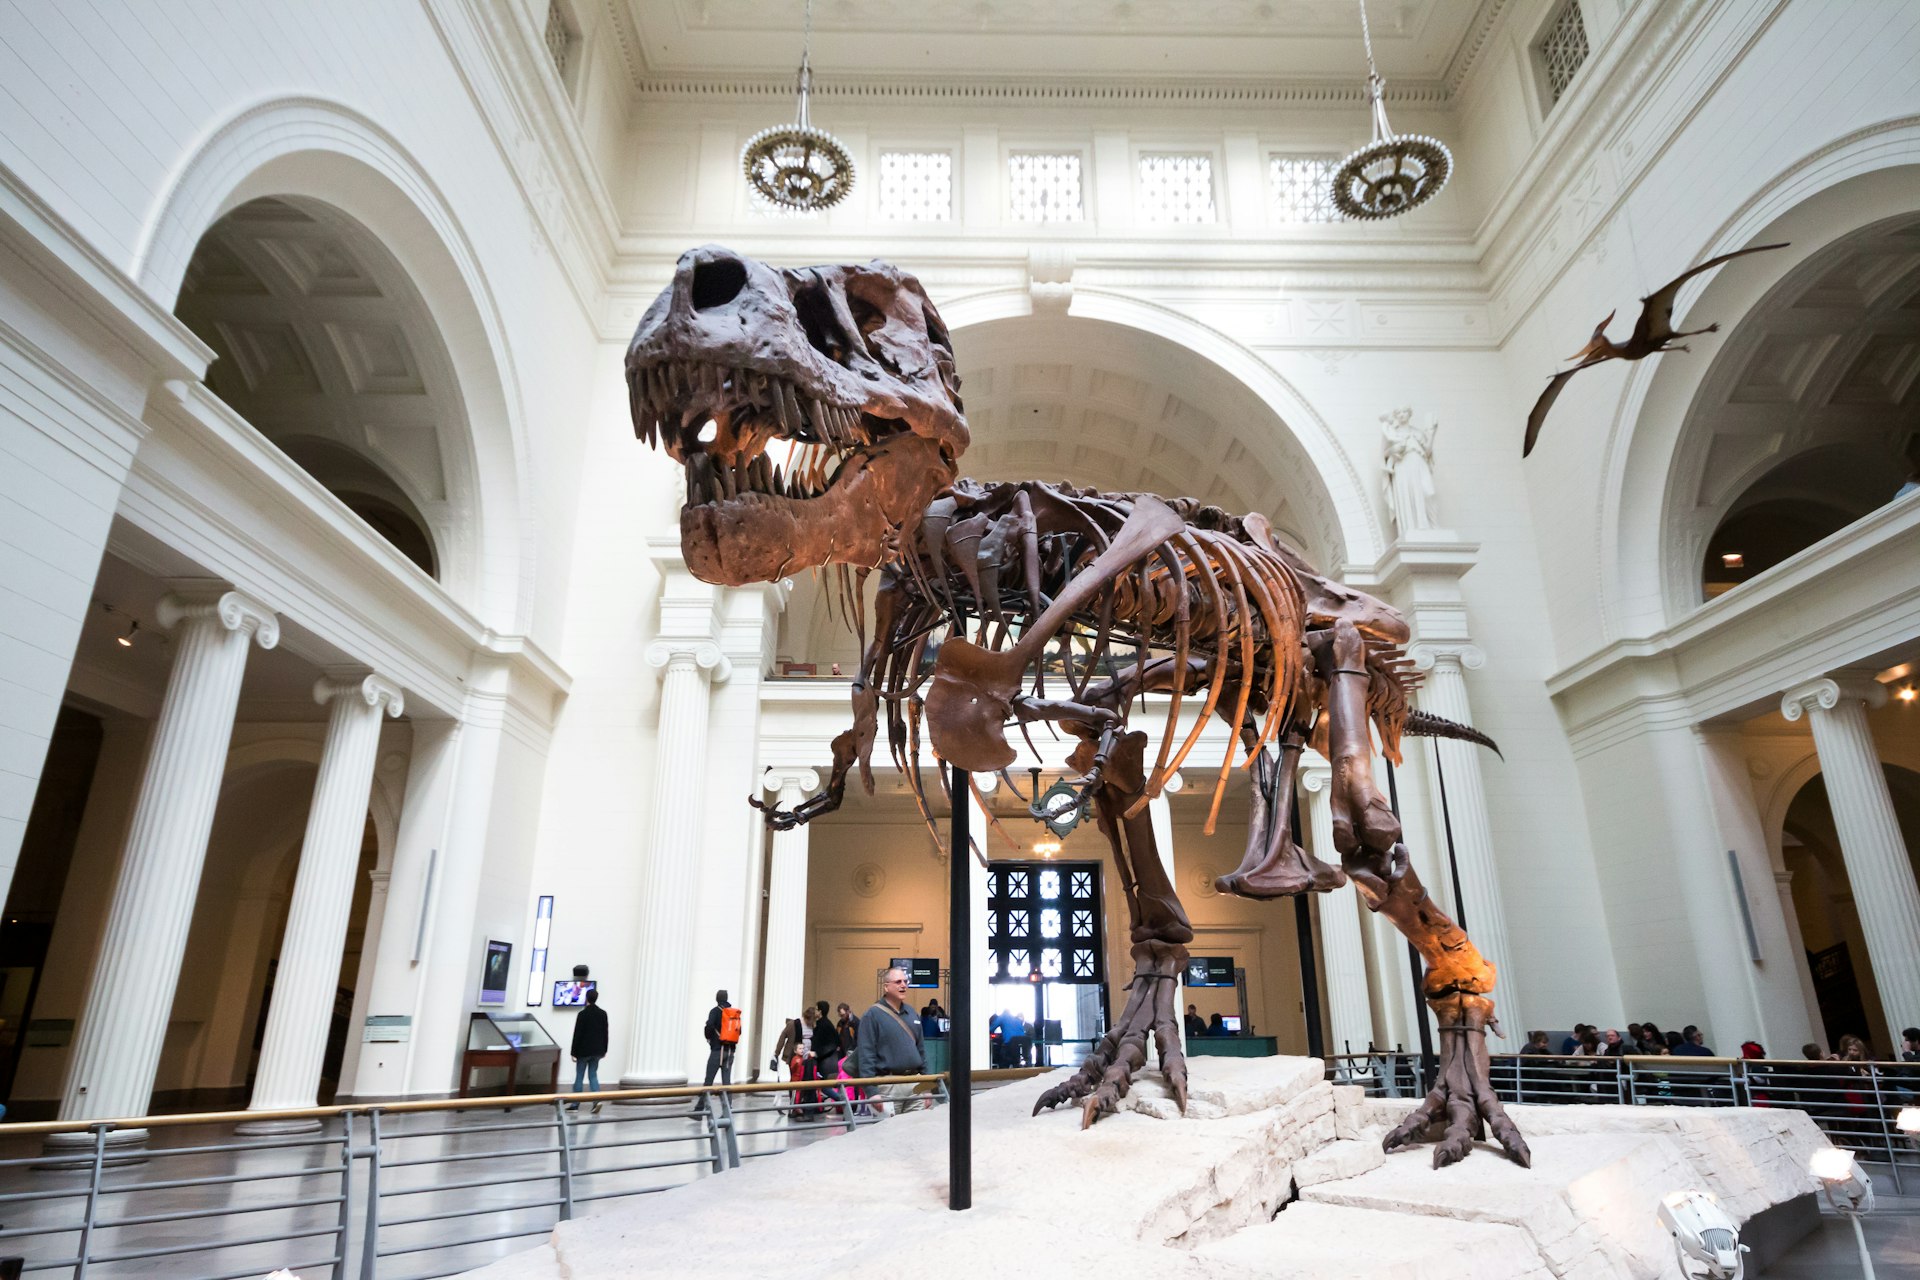 The Tyrannosaurus Rex exhibit at the Field Museum of Natural History in Chicago